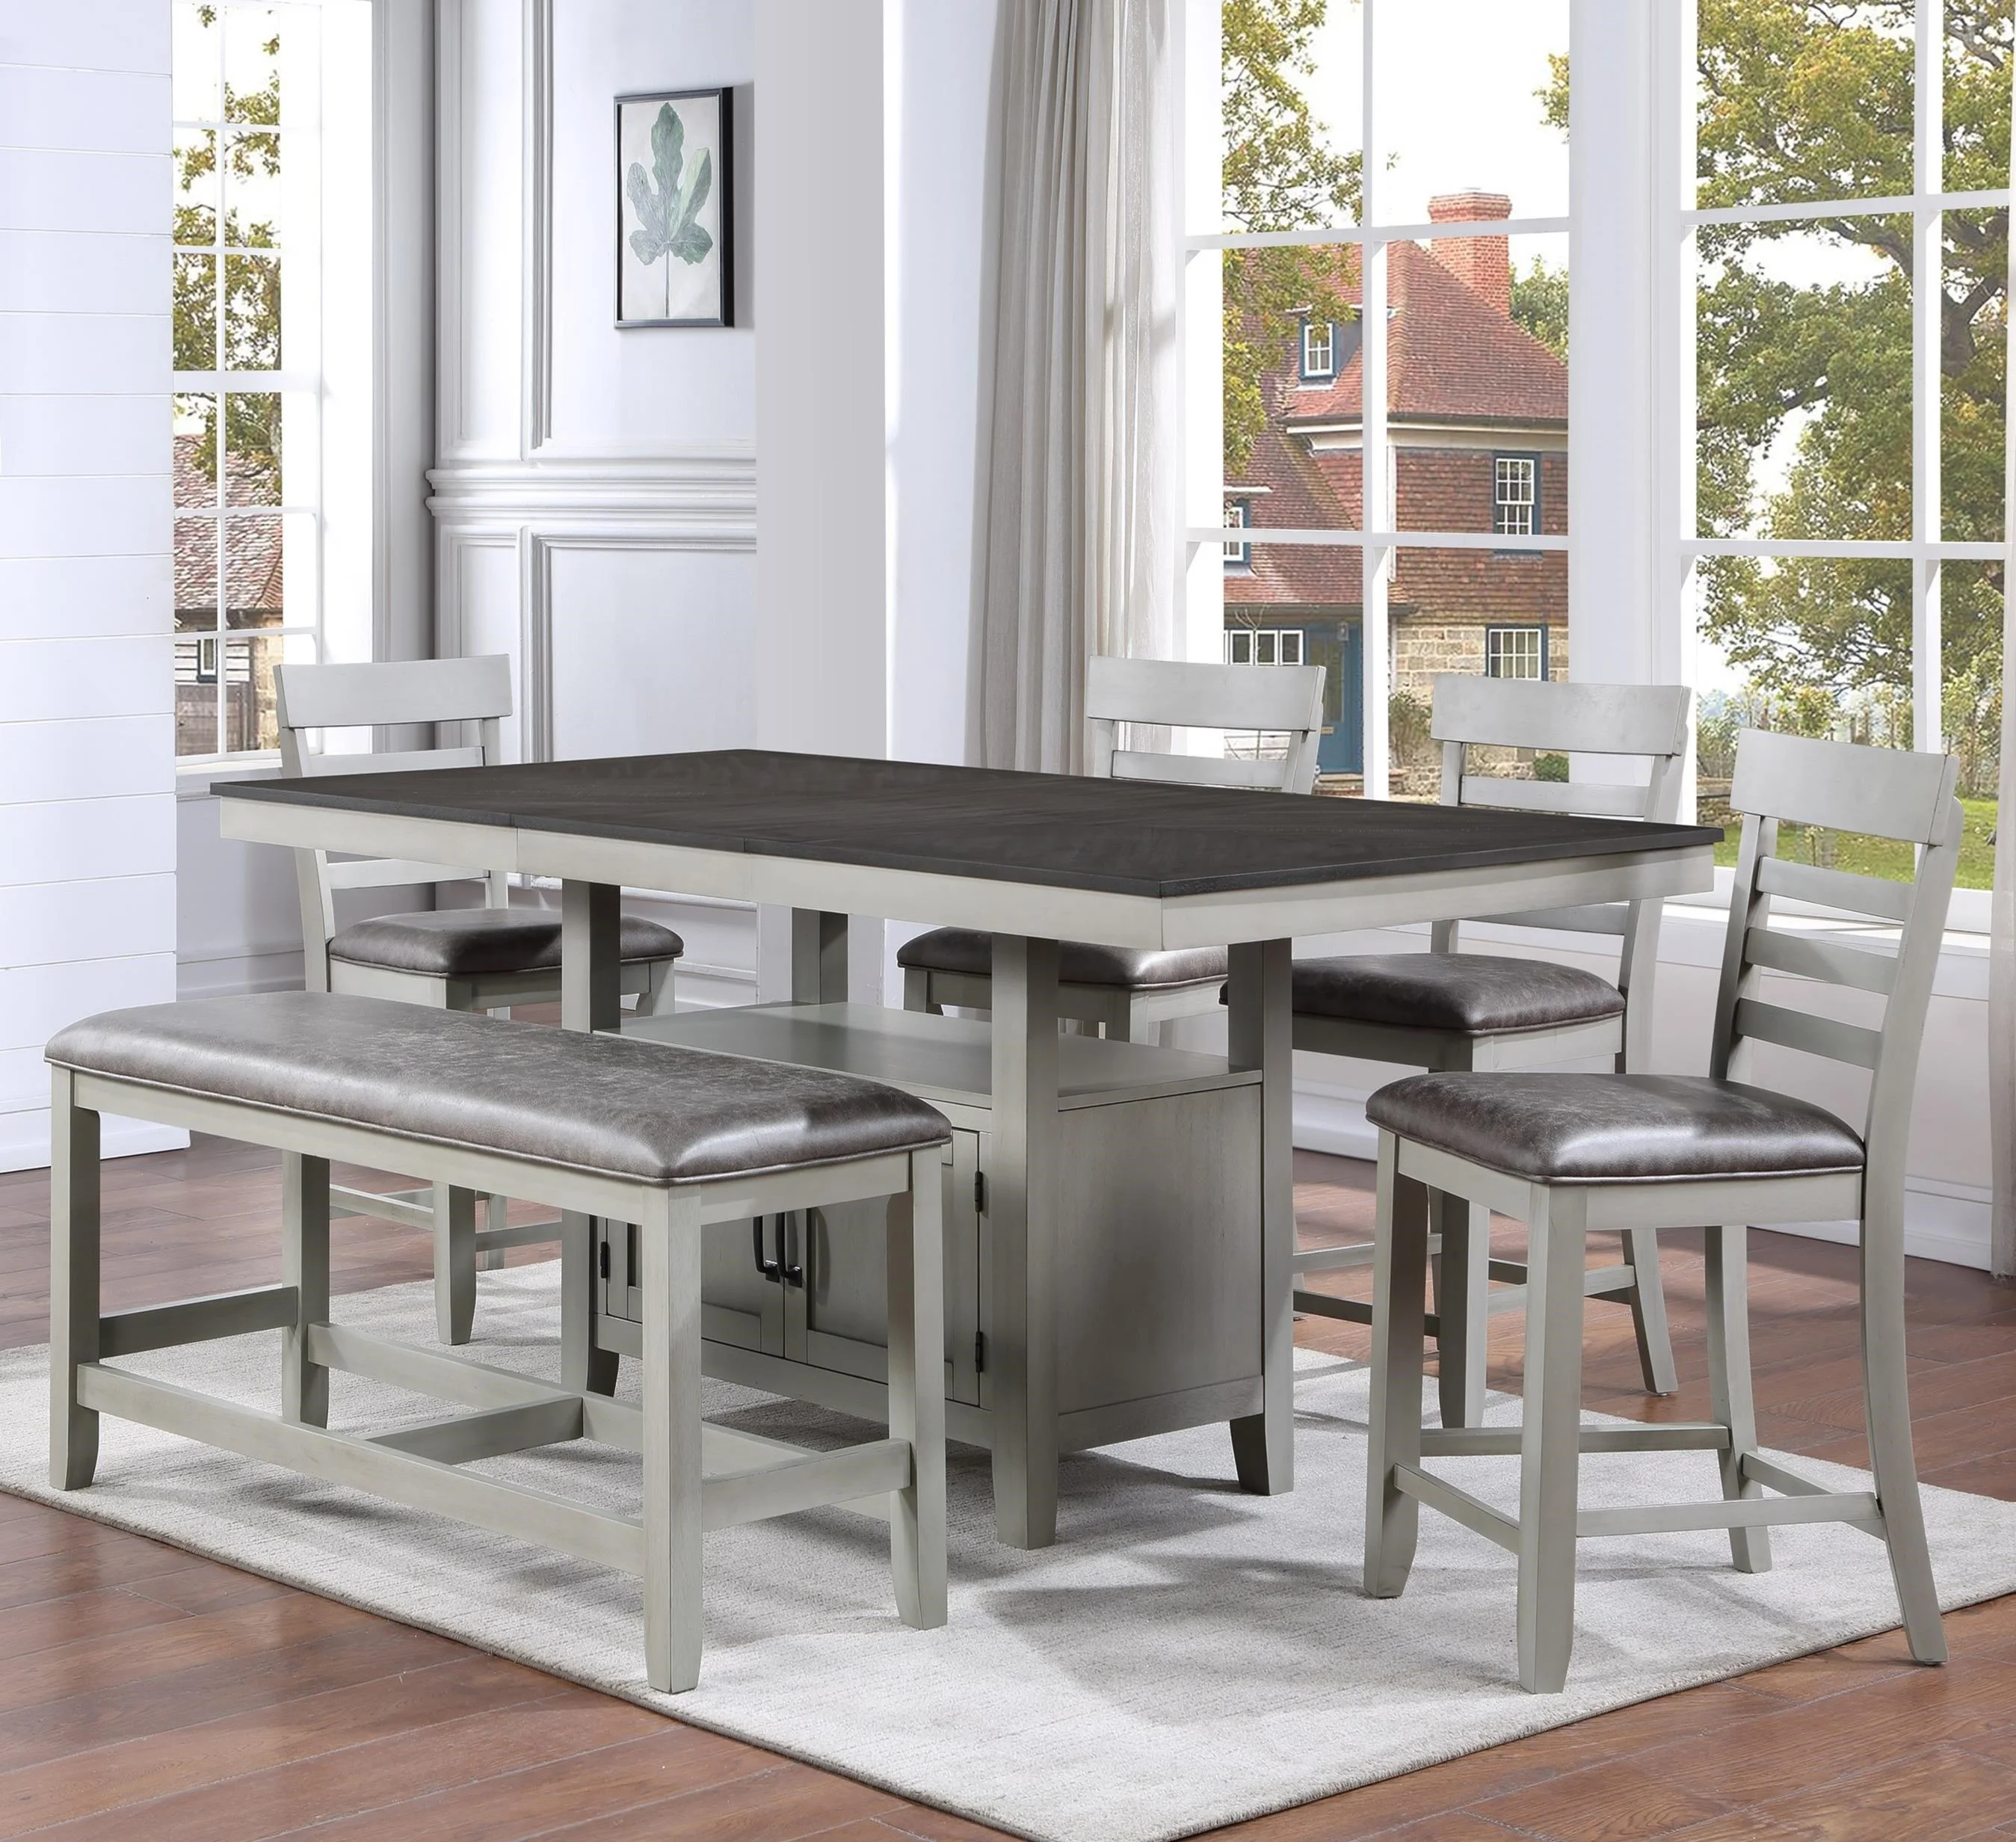 Hyland Hills 5-pc Dining Cover Set